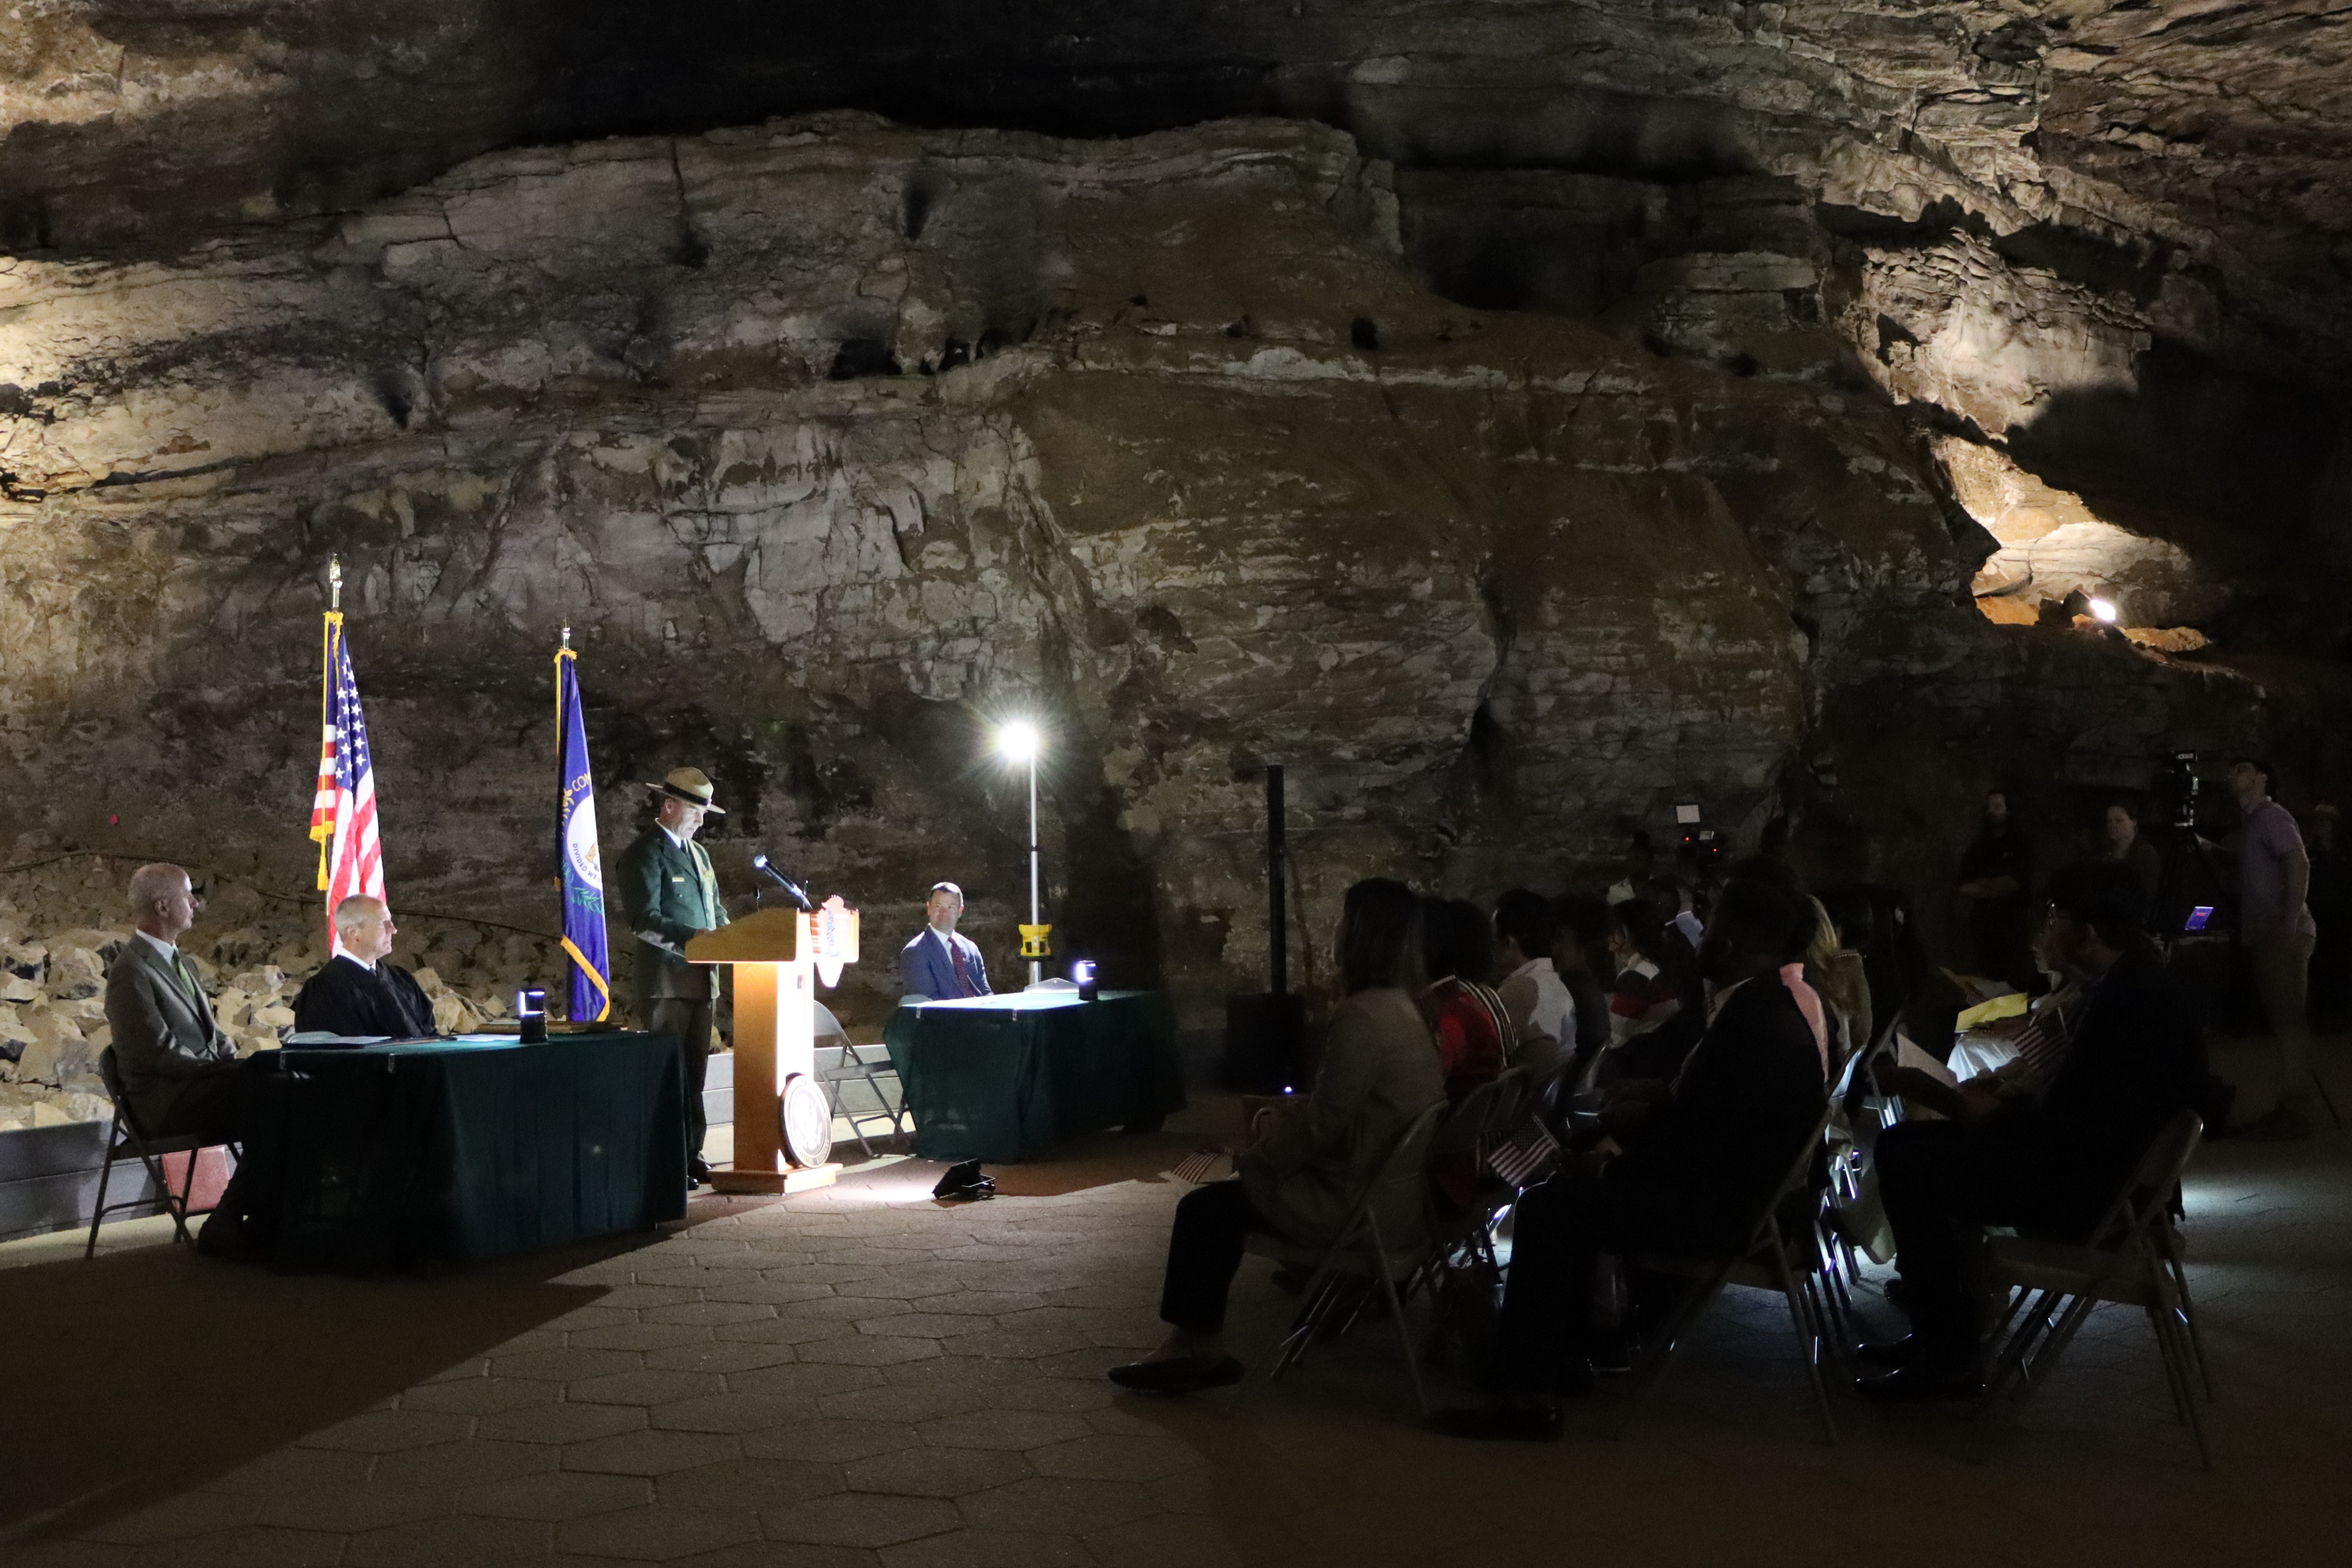 A man in a National Park Service Uniform stands at a podium in front of a seated crowd of people inside a dimly lit cave.